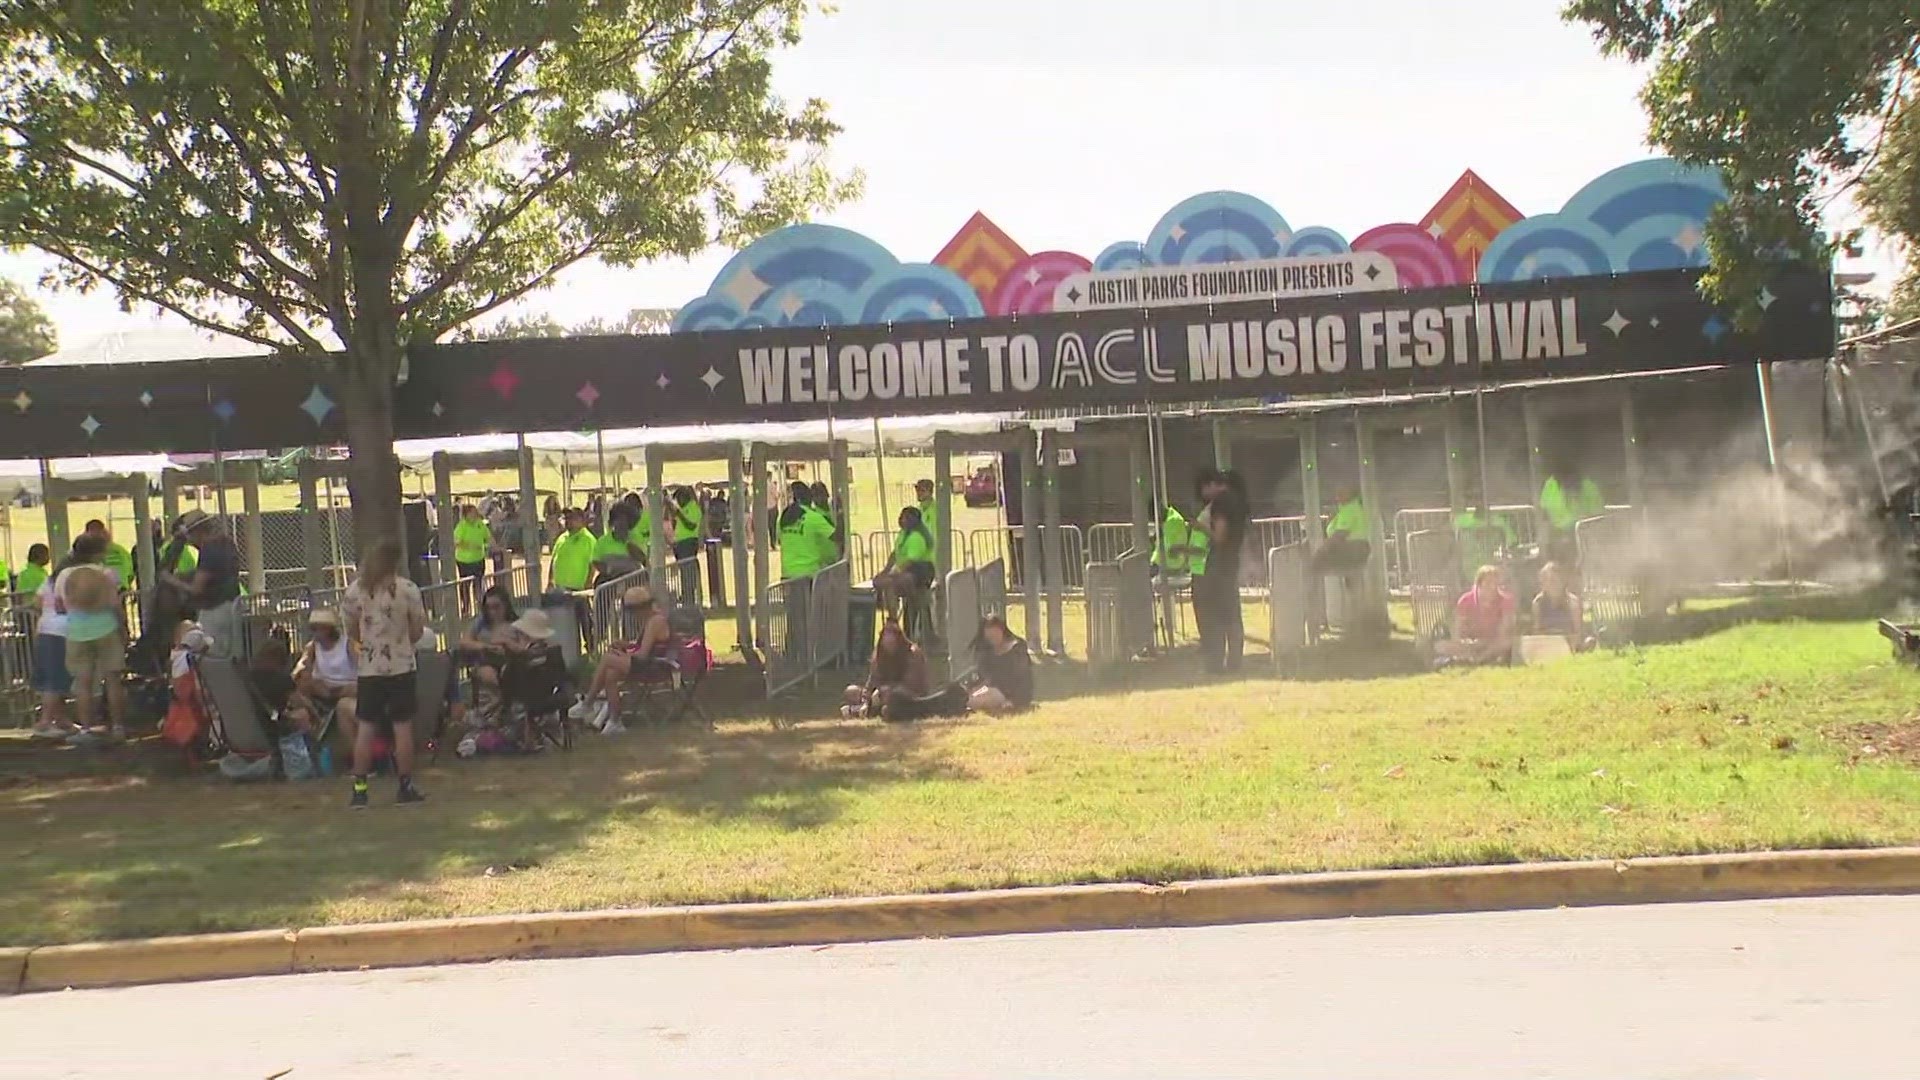 KVUE's Melia Masumoto has some general tips for how to have your best fest.